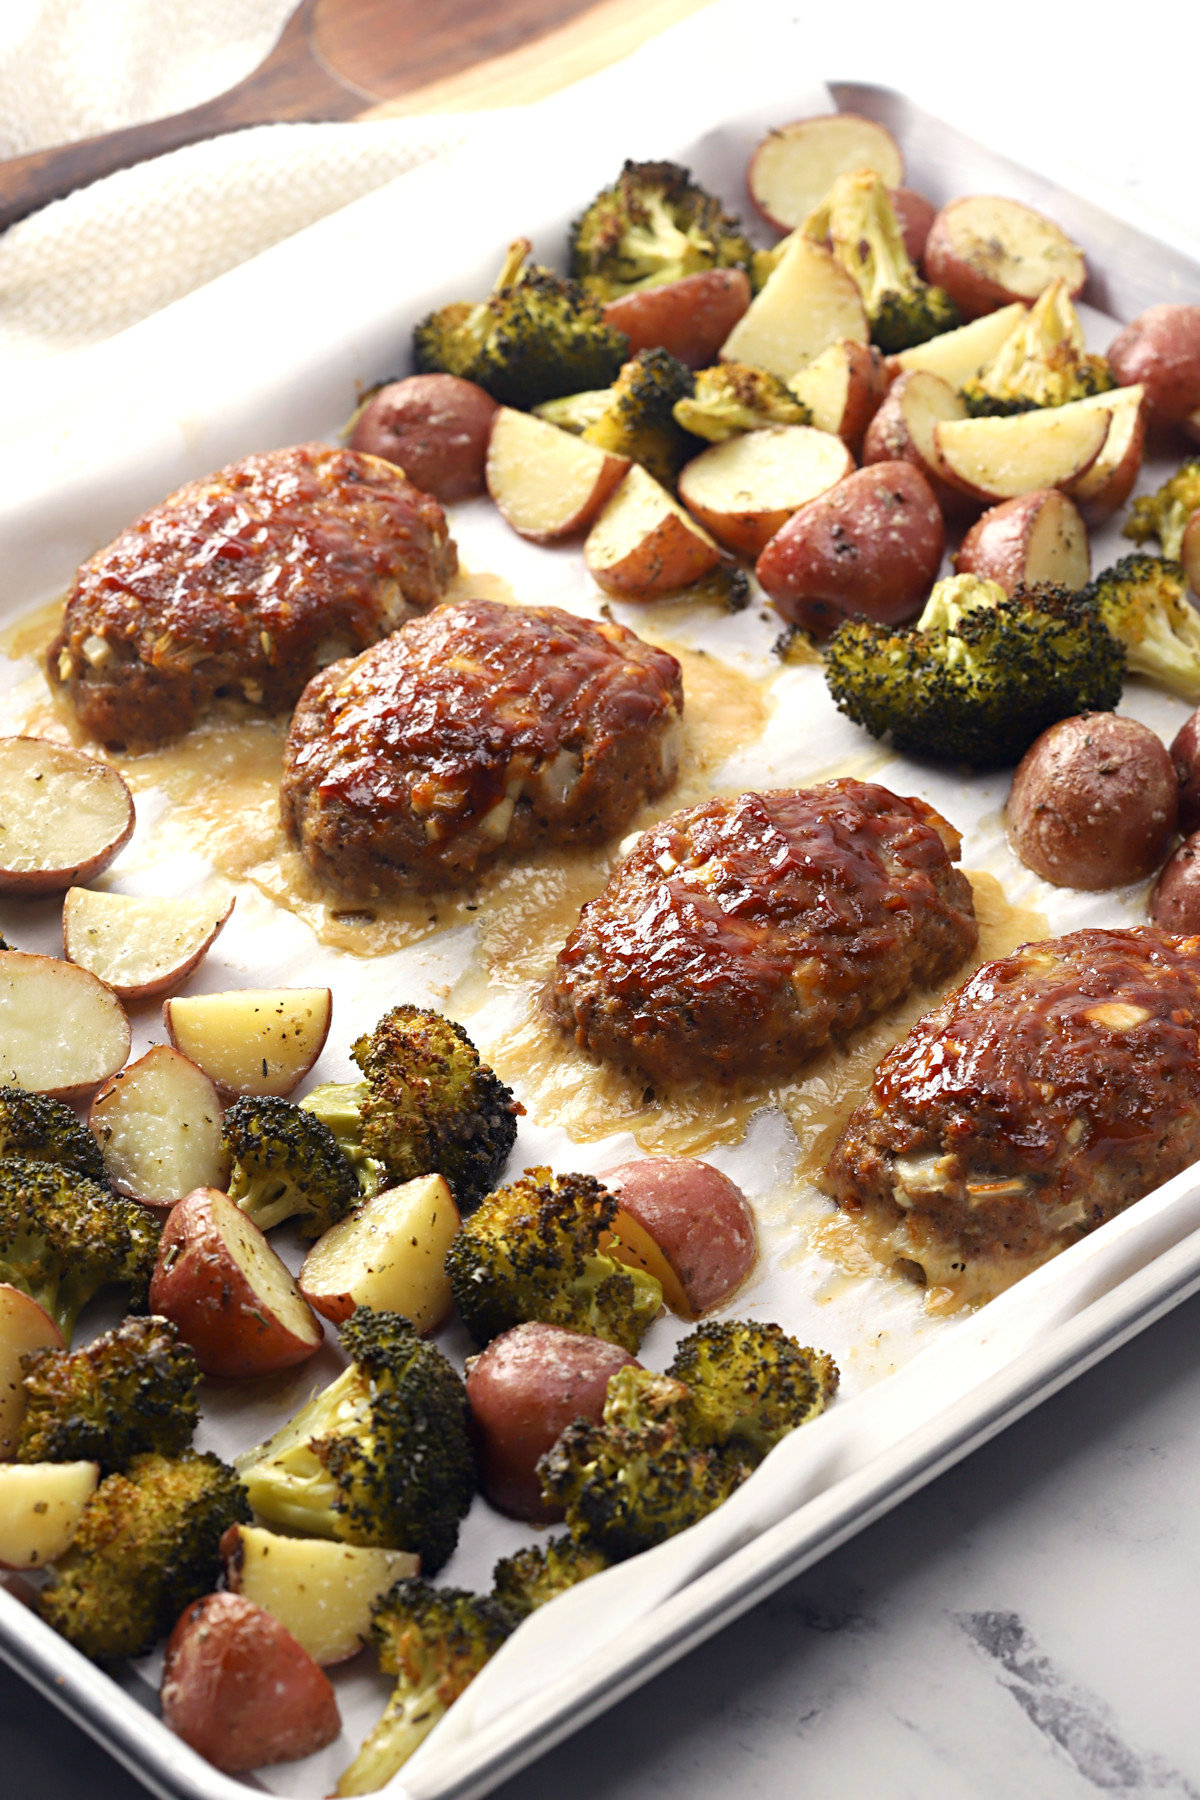 Sheet pan filled with mini meatloaves, potatoes, and broccoli.